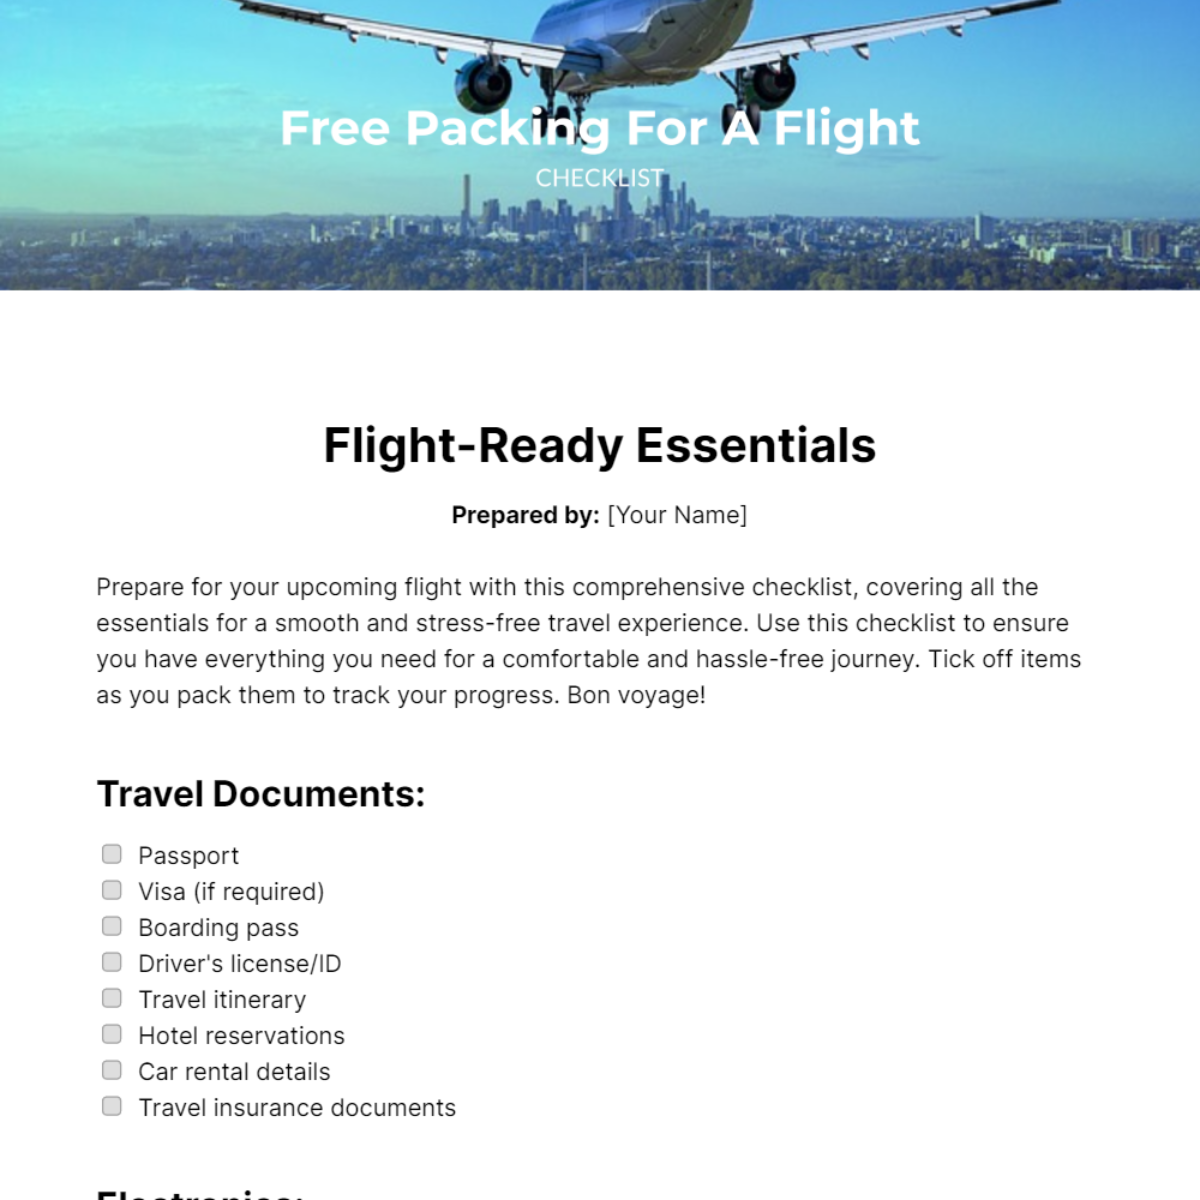 Packing For A Flight Checklist Template